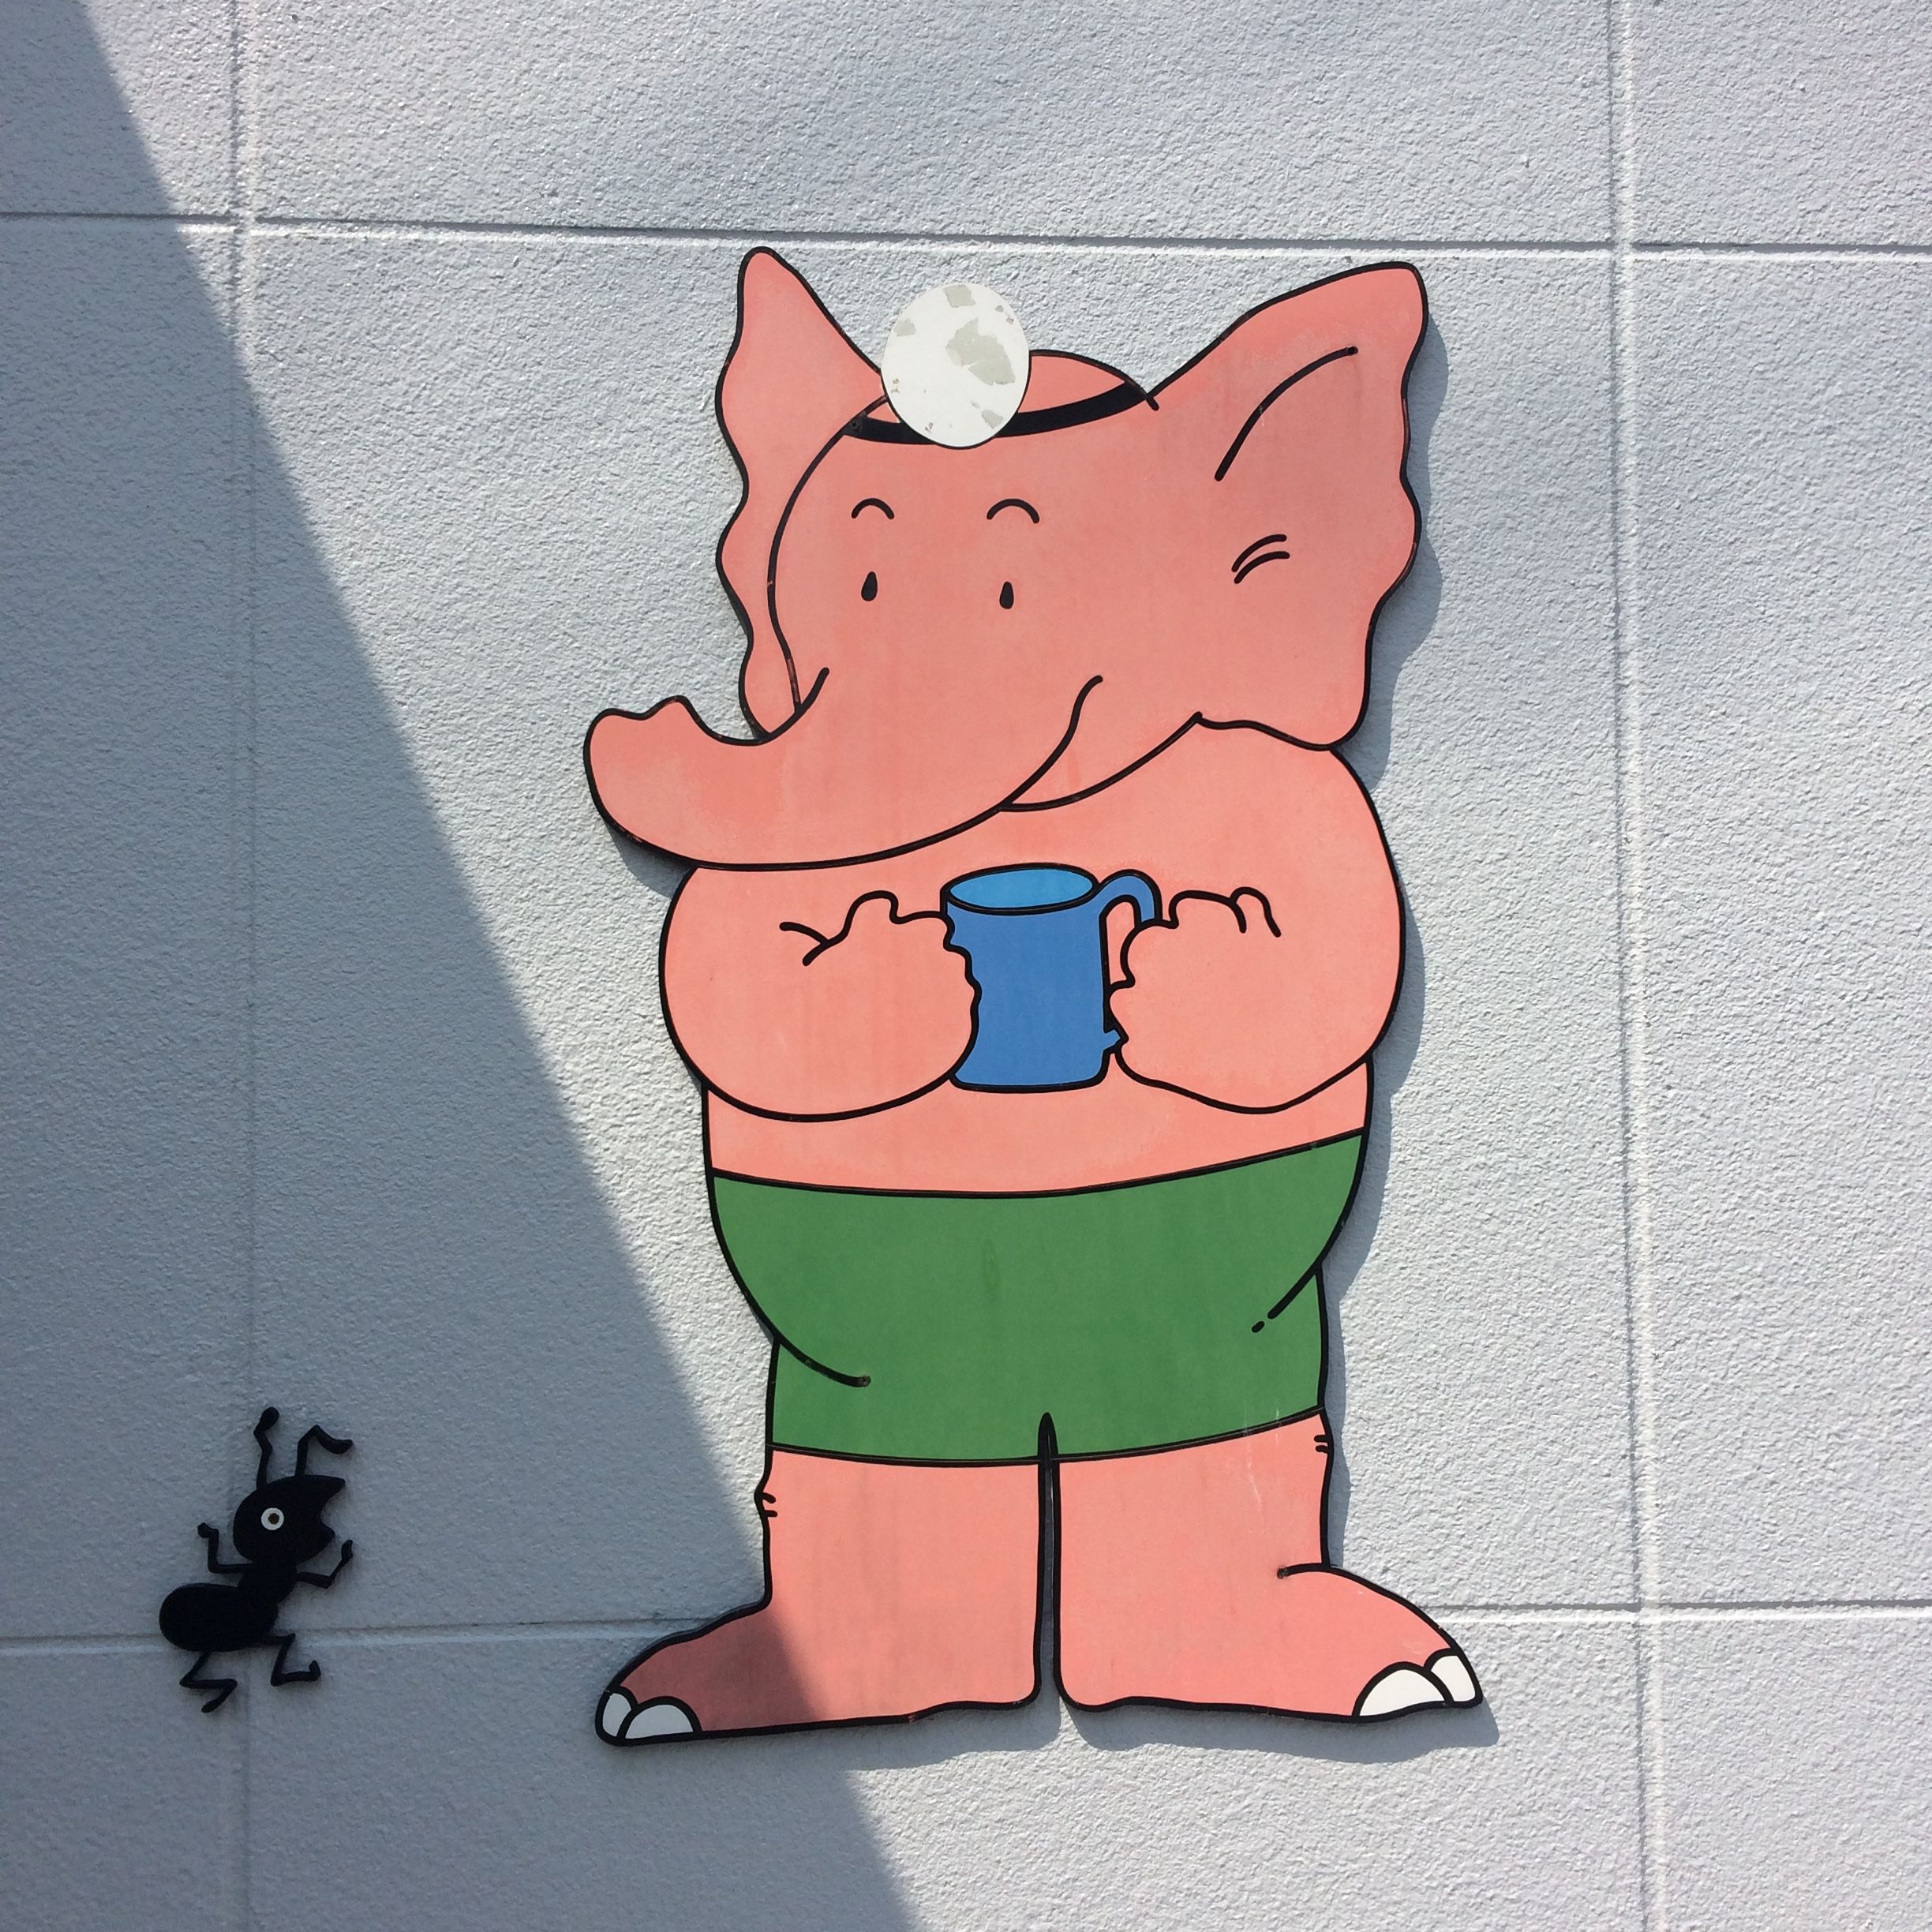 On the same wall as above, a cartoon elephant wearing green trunks and an ophthalmologist’s headlamp holds a blue mug and smiles at a small, worried ant.